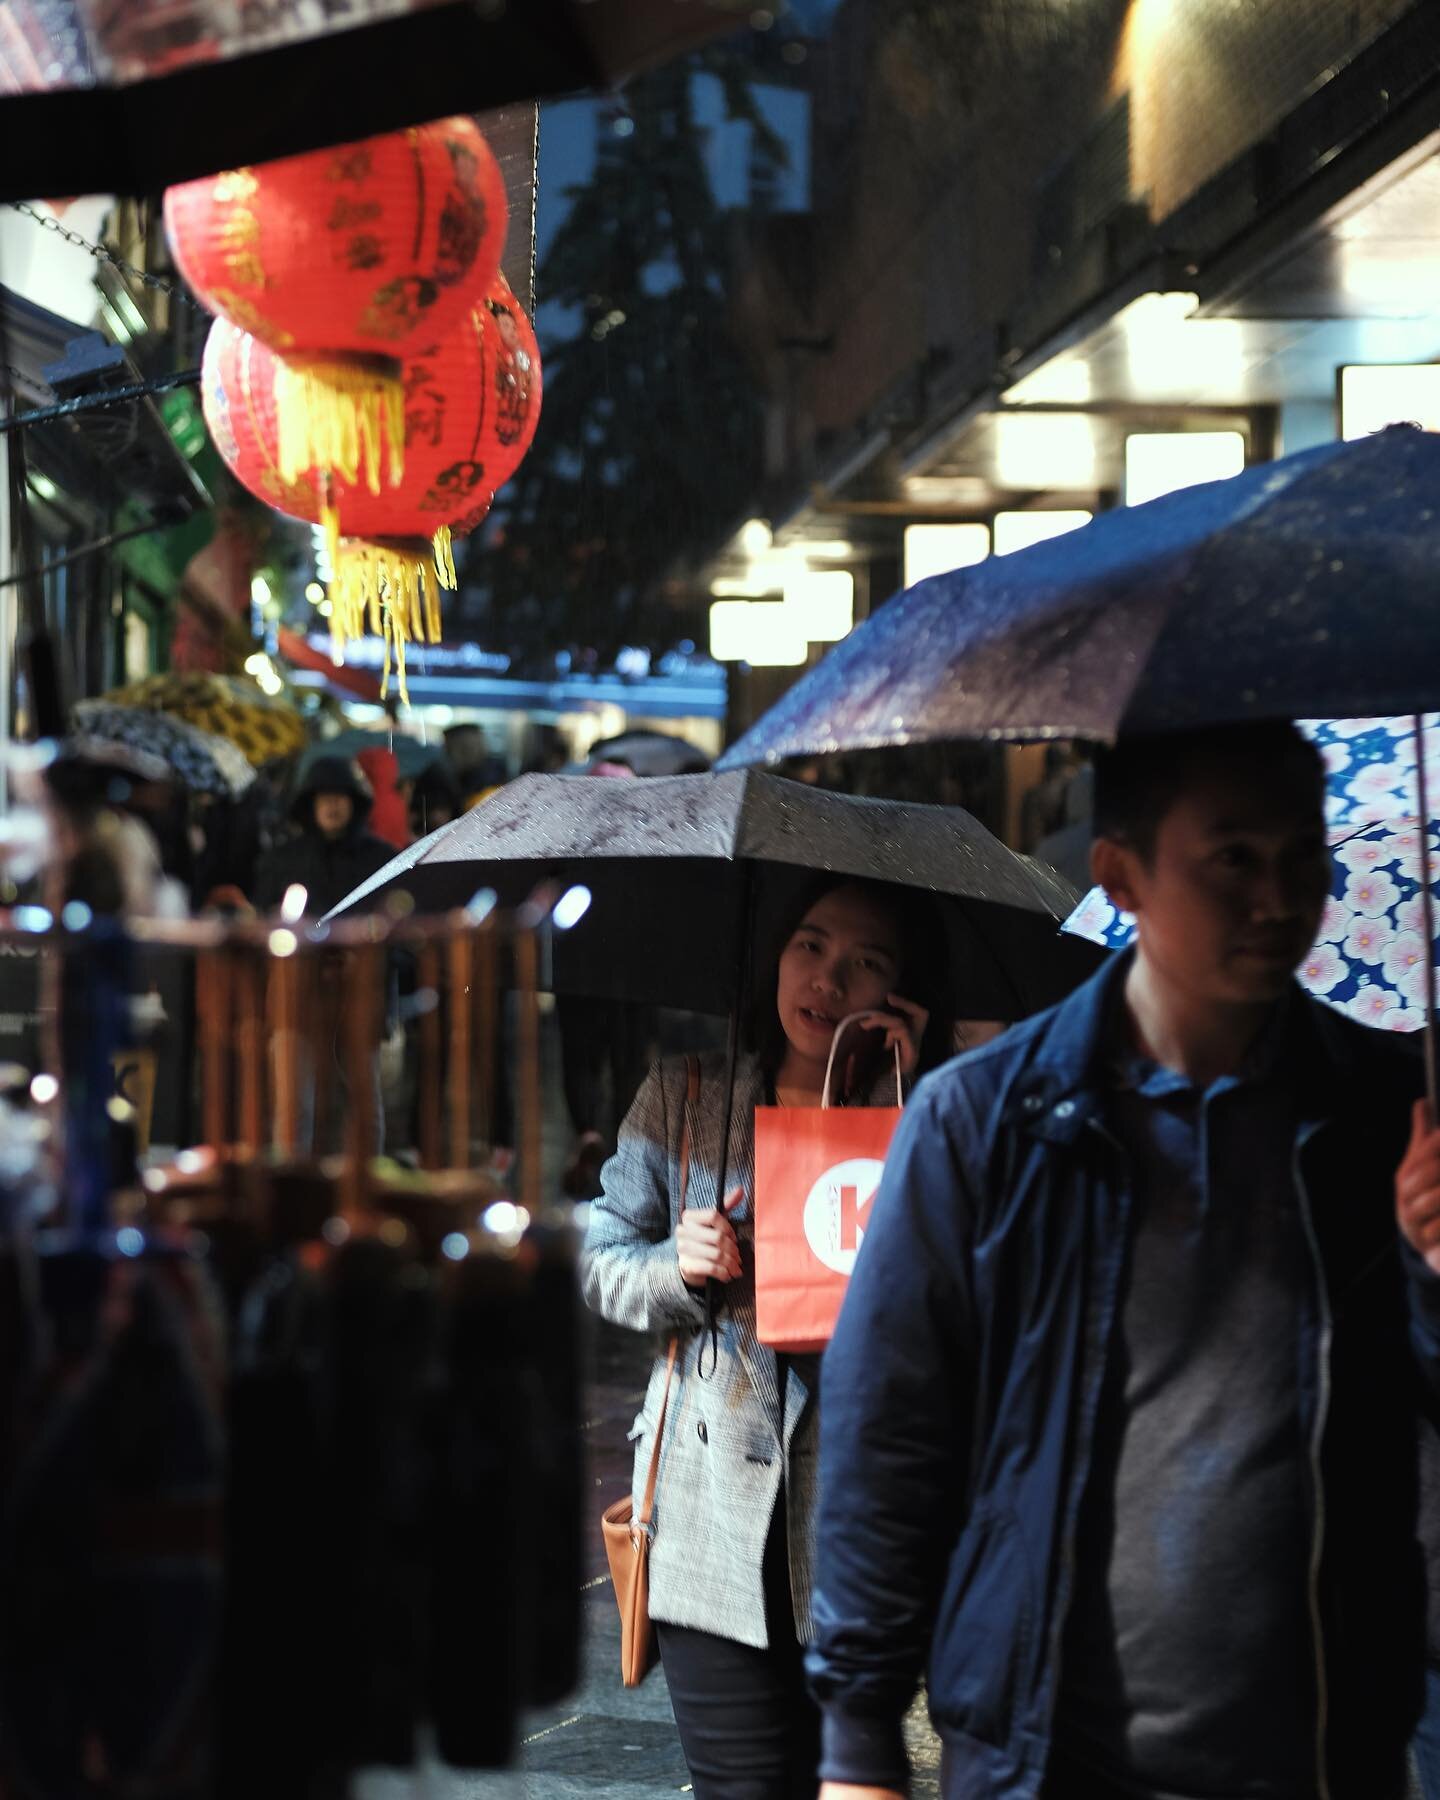 A damp evening in Chinatown